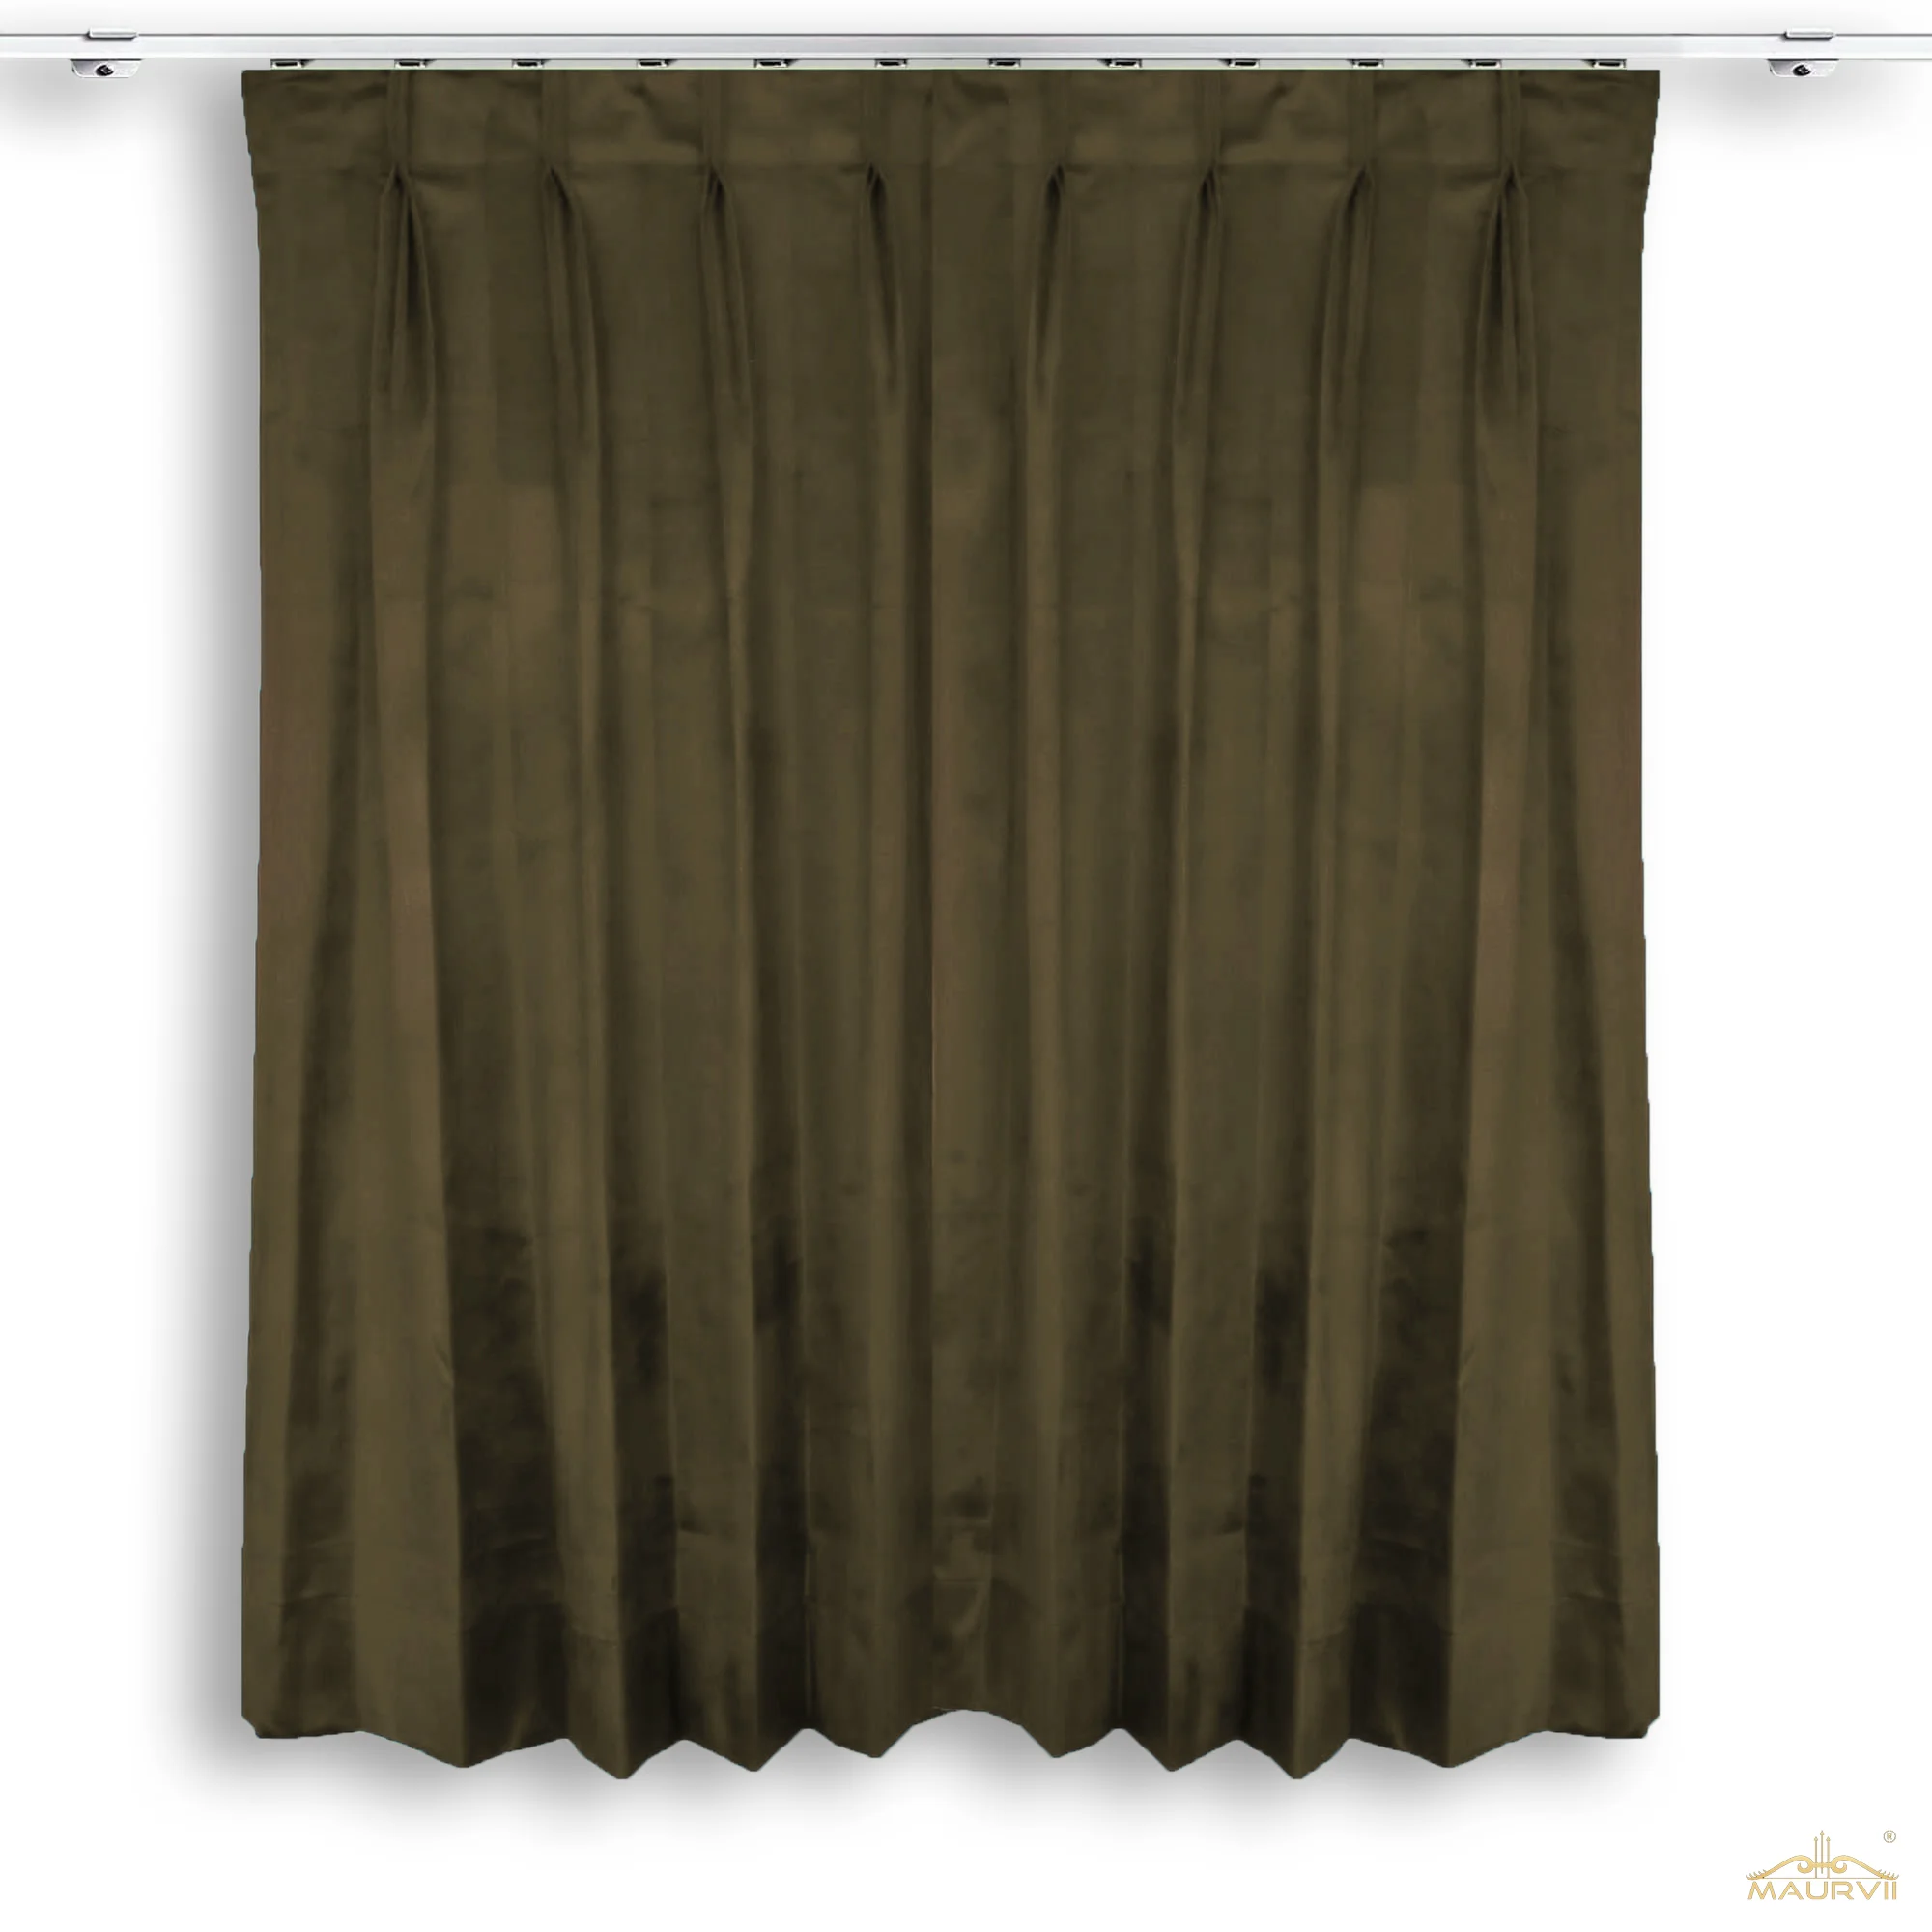 Double pleated velvet stage curtains in chocolate brown color